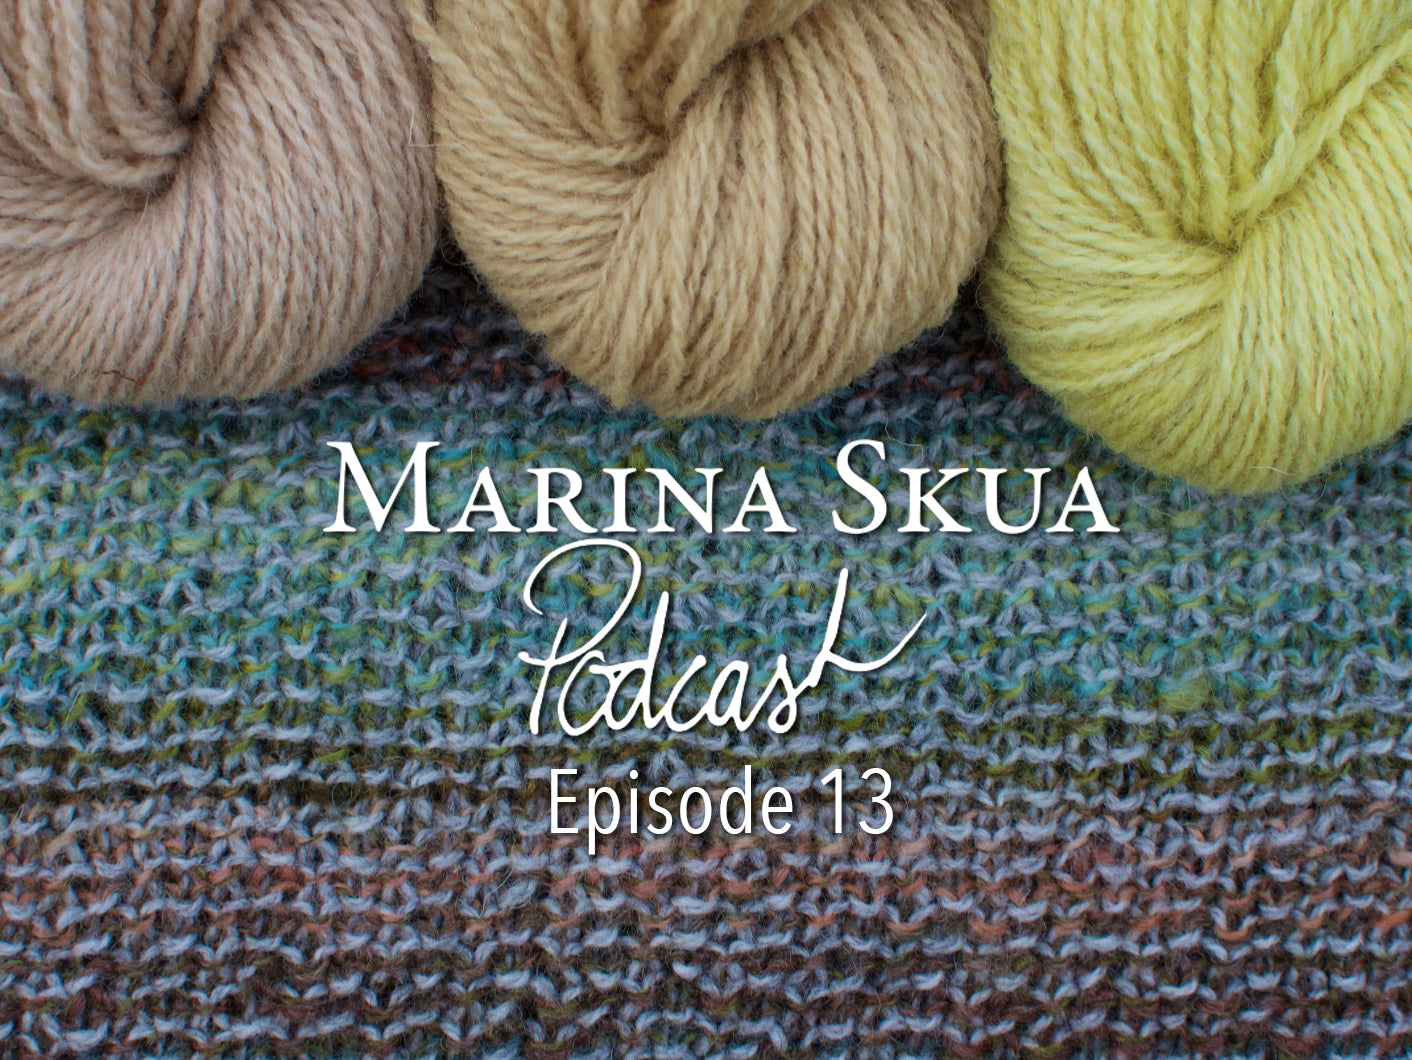 Episode 13 of the Podcast – A giveaway, dyeing with calendula, resources for designers